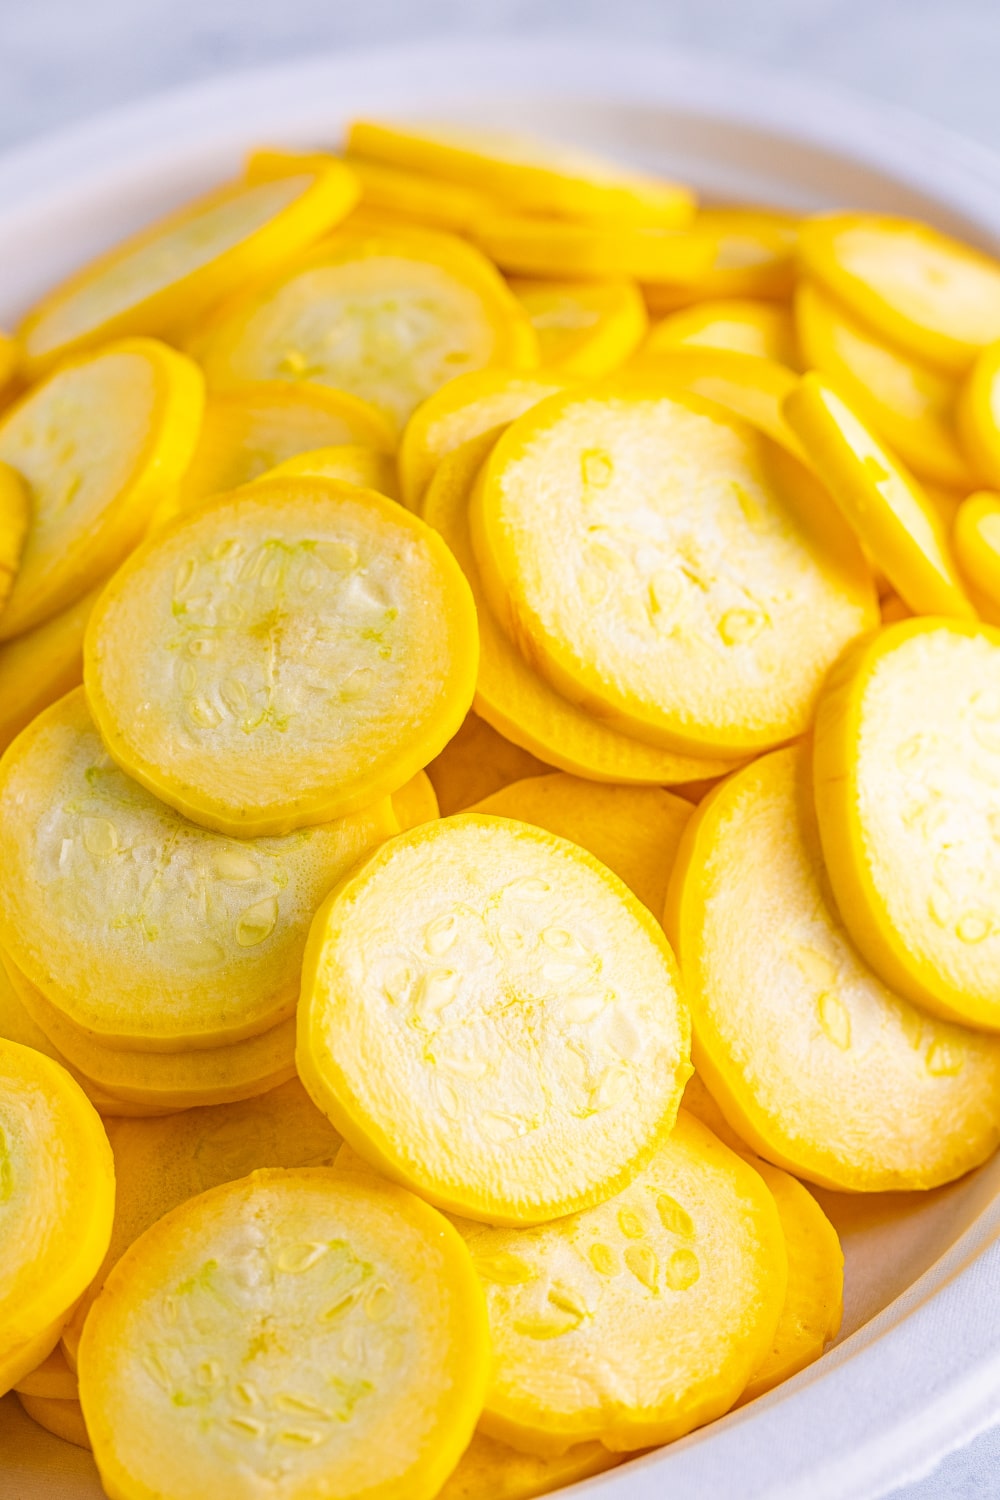 Fresh squash sliced into 1/4 inch thick rounds sitting in a white bowl.